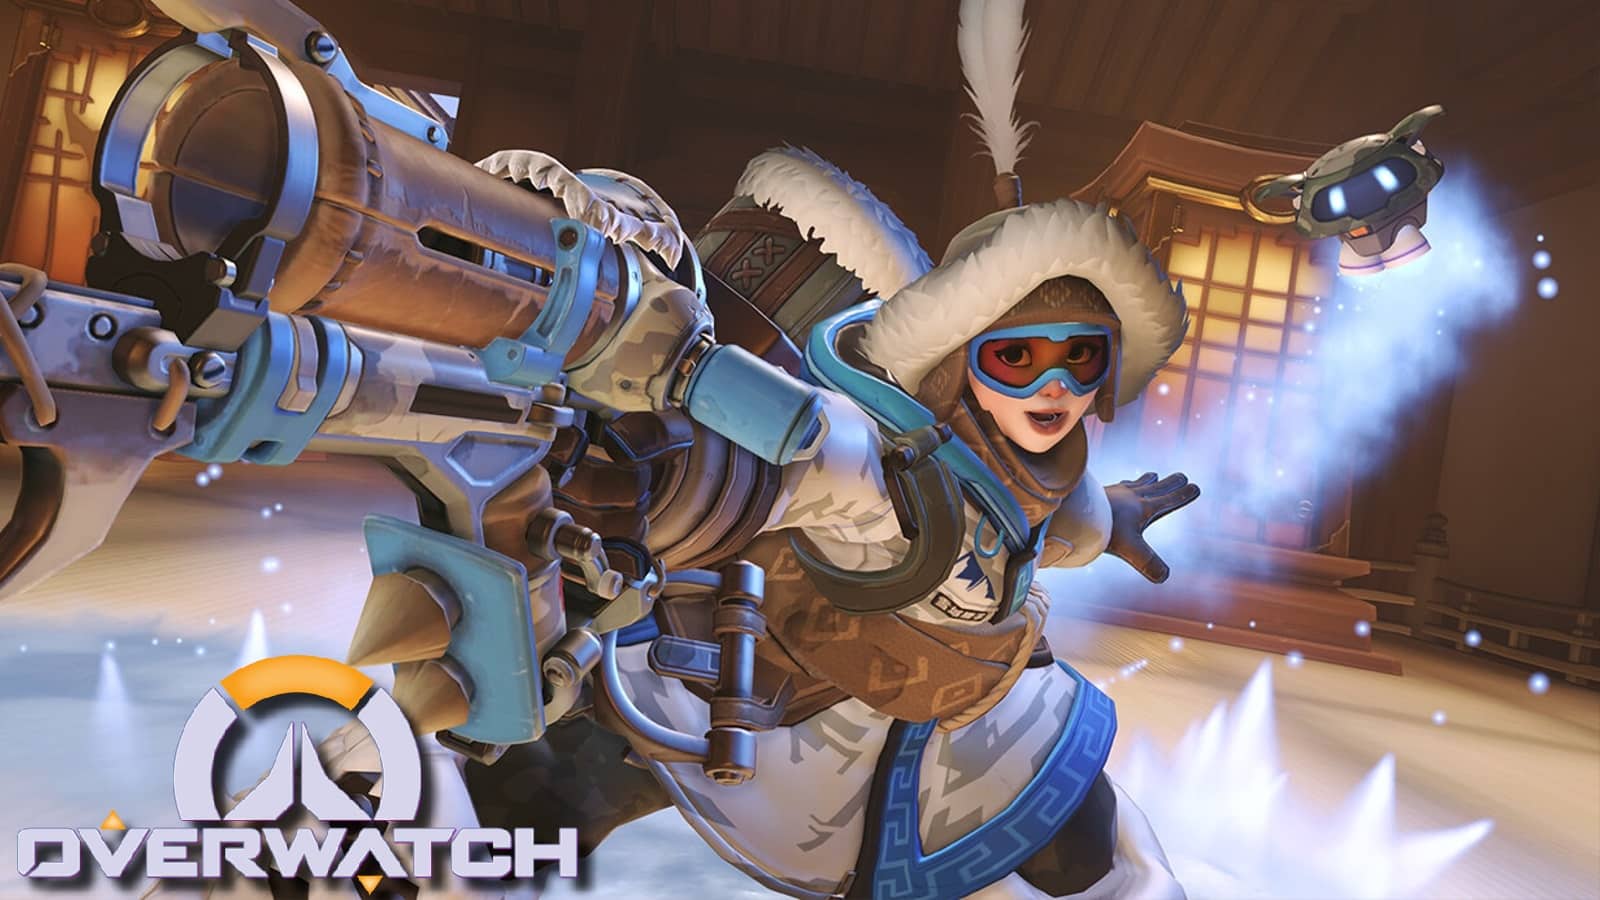 Overwatch Mei Winter Event Experimental Patch Cryo Freeze Ability Damage OP Alt With Game Logo Final